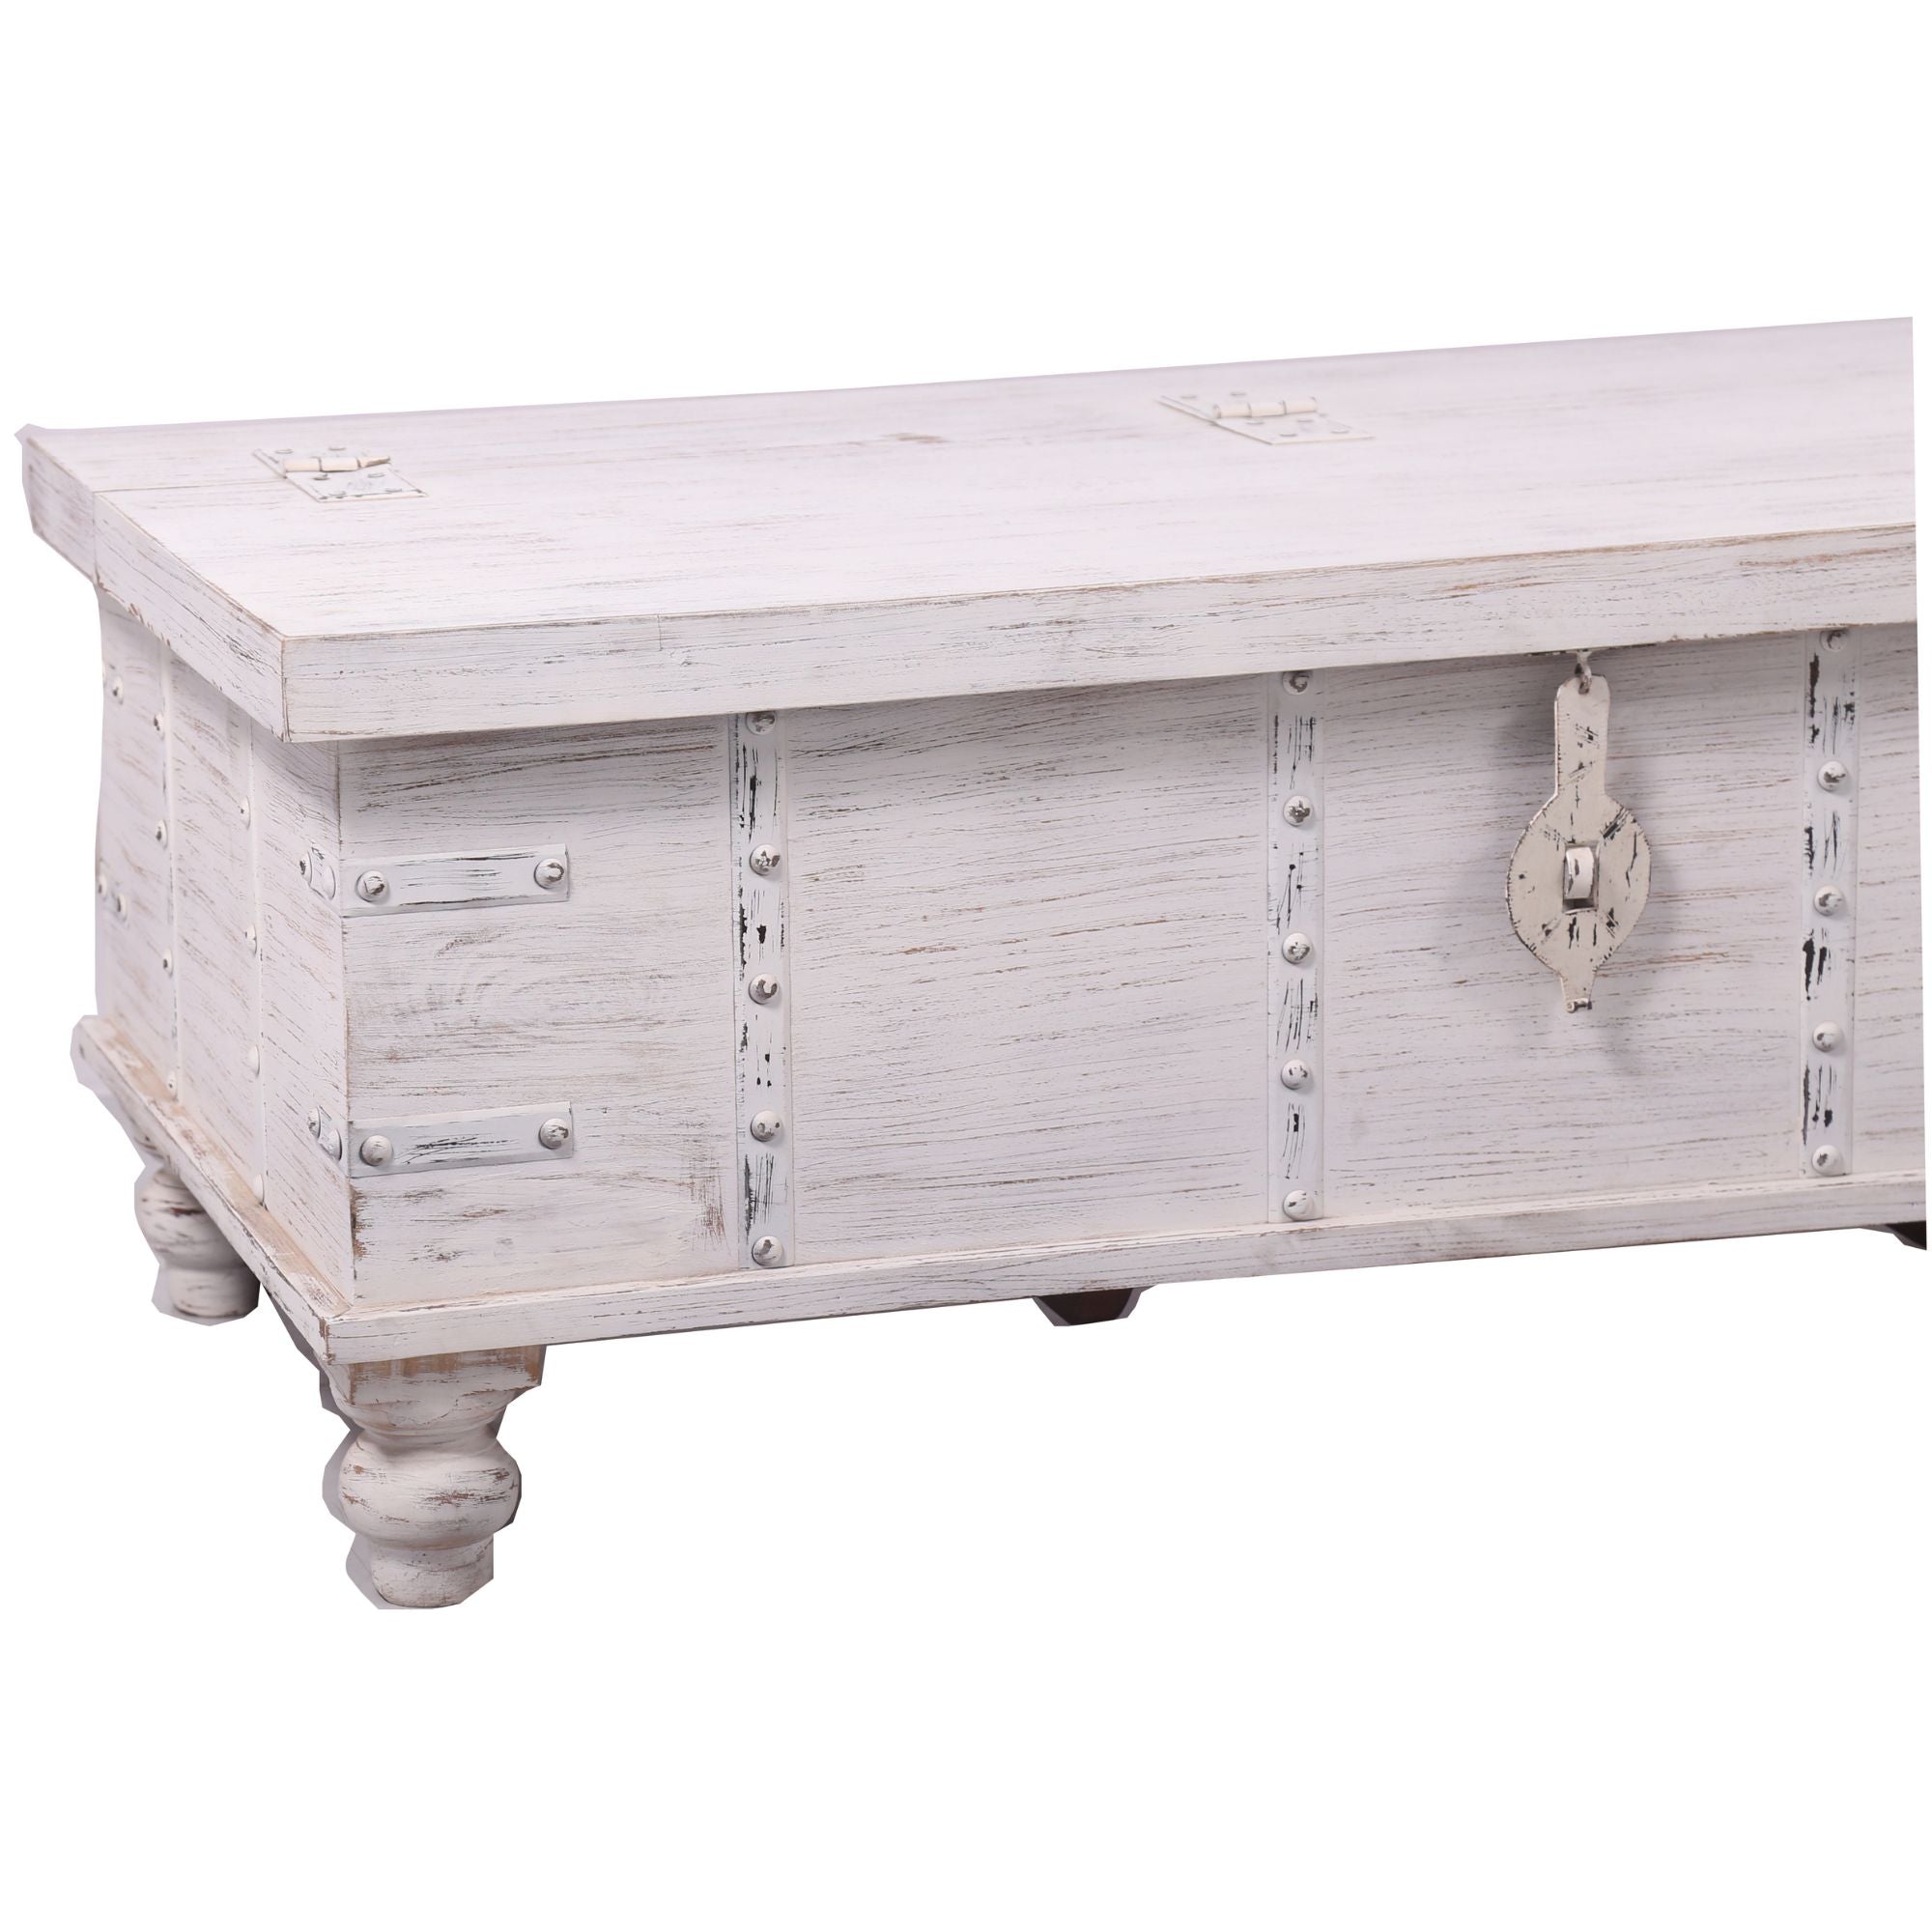 Coffee Table Antique Handcrafted Solid Mango Wood Storage Trunk Chest